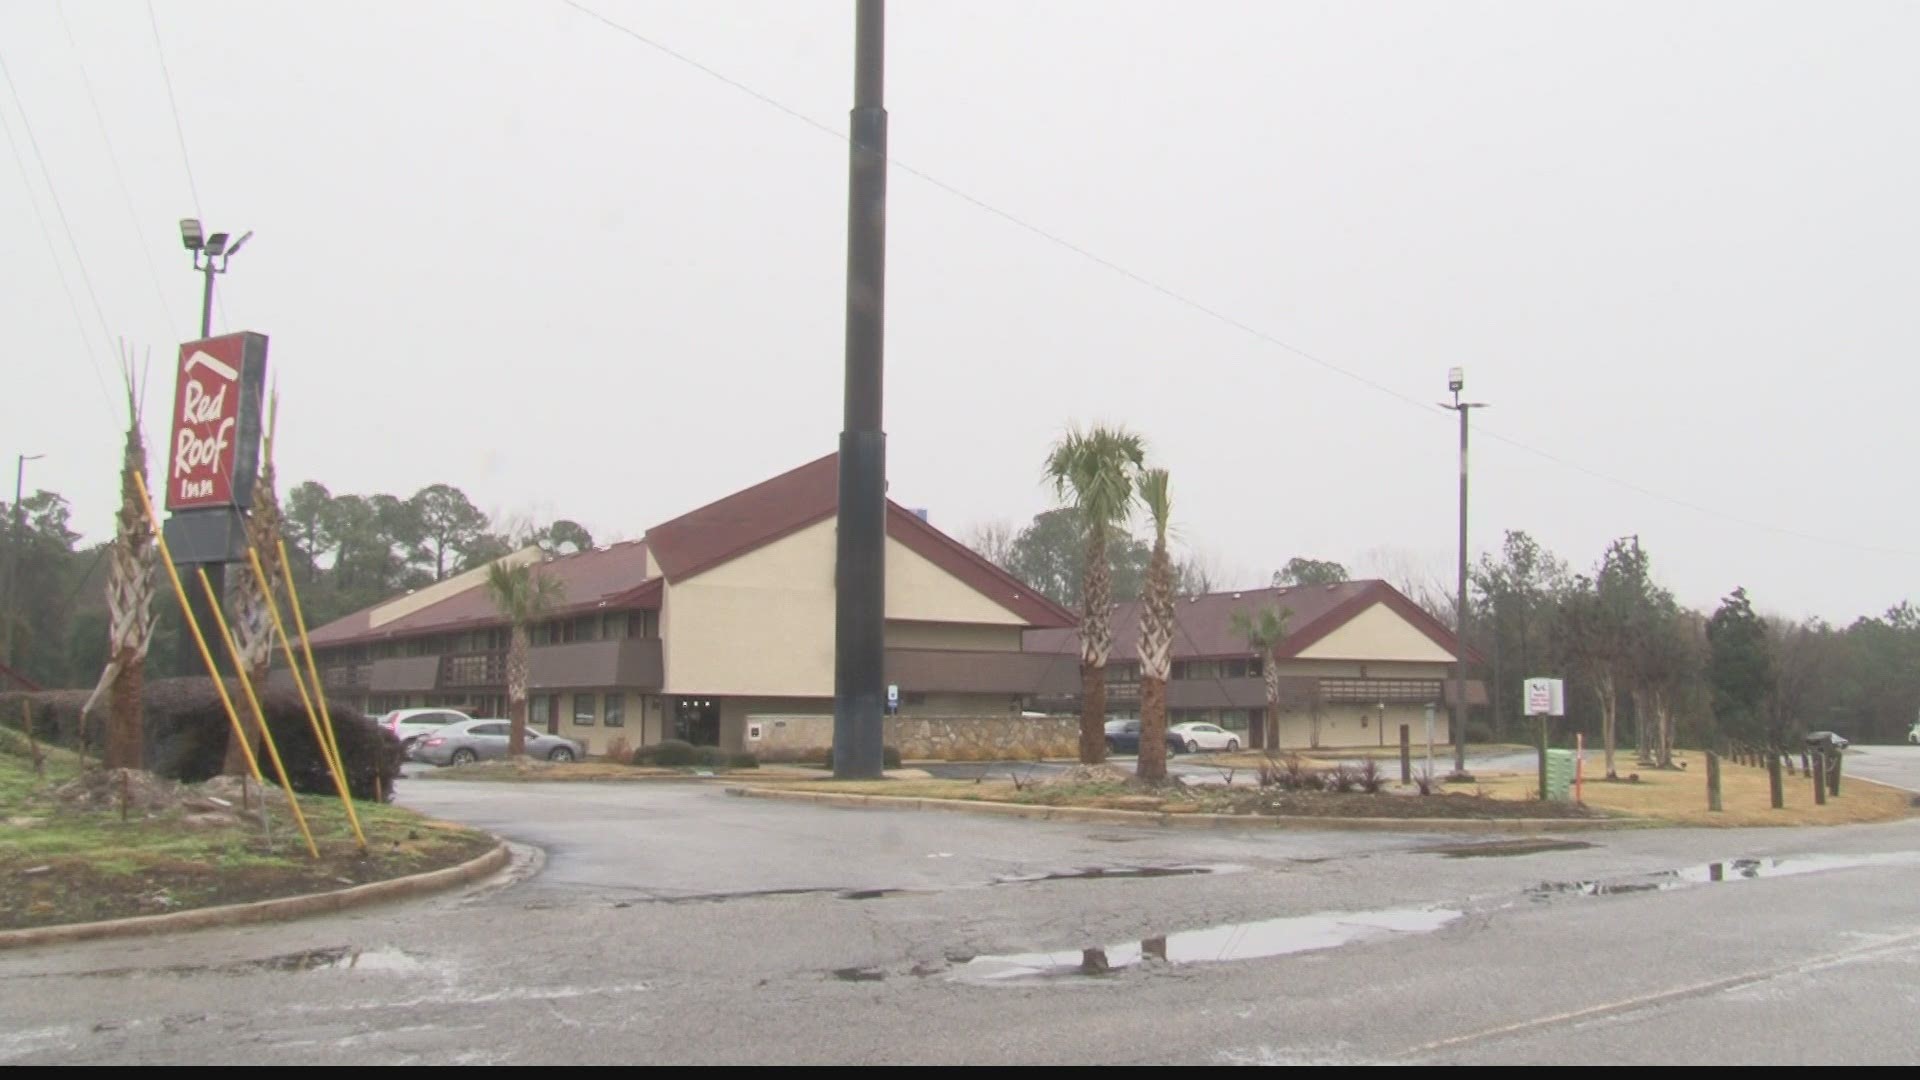 The victim was found shot to death at a Red Roof Inn in Richland County on December 31 just before midnight.